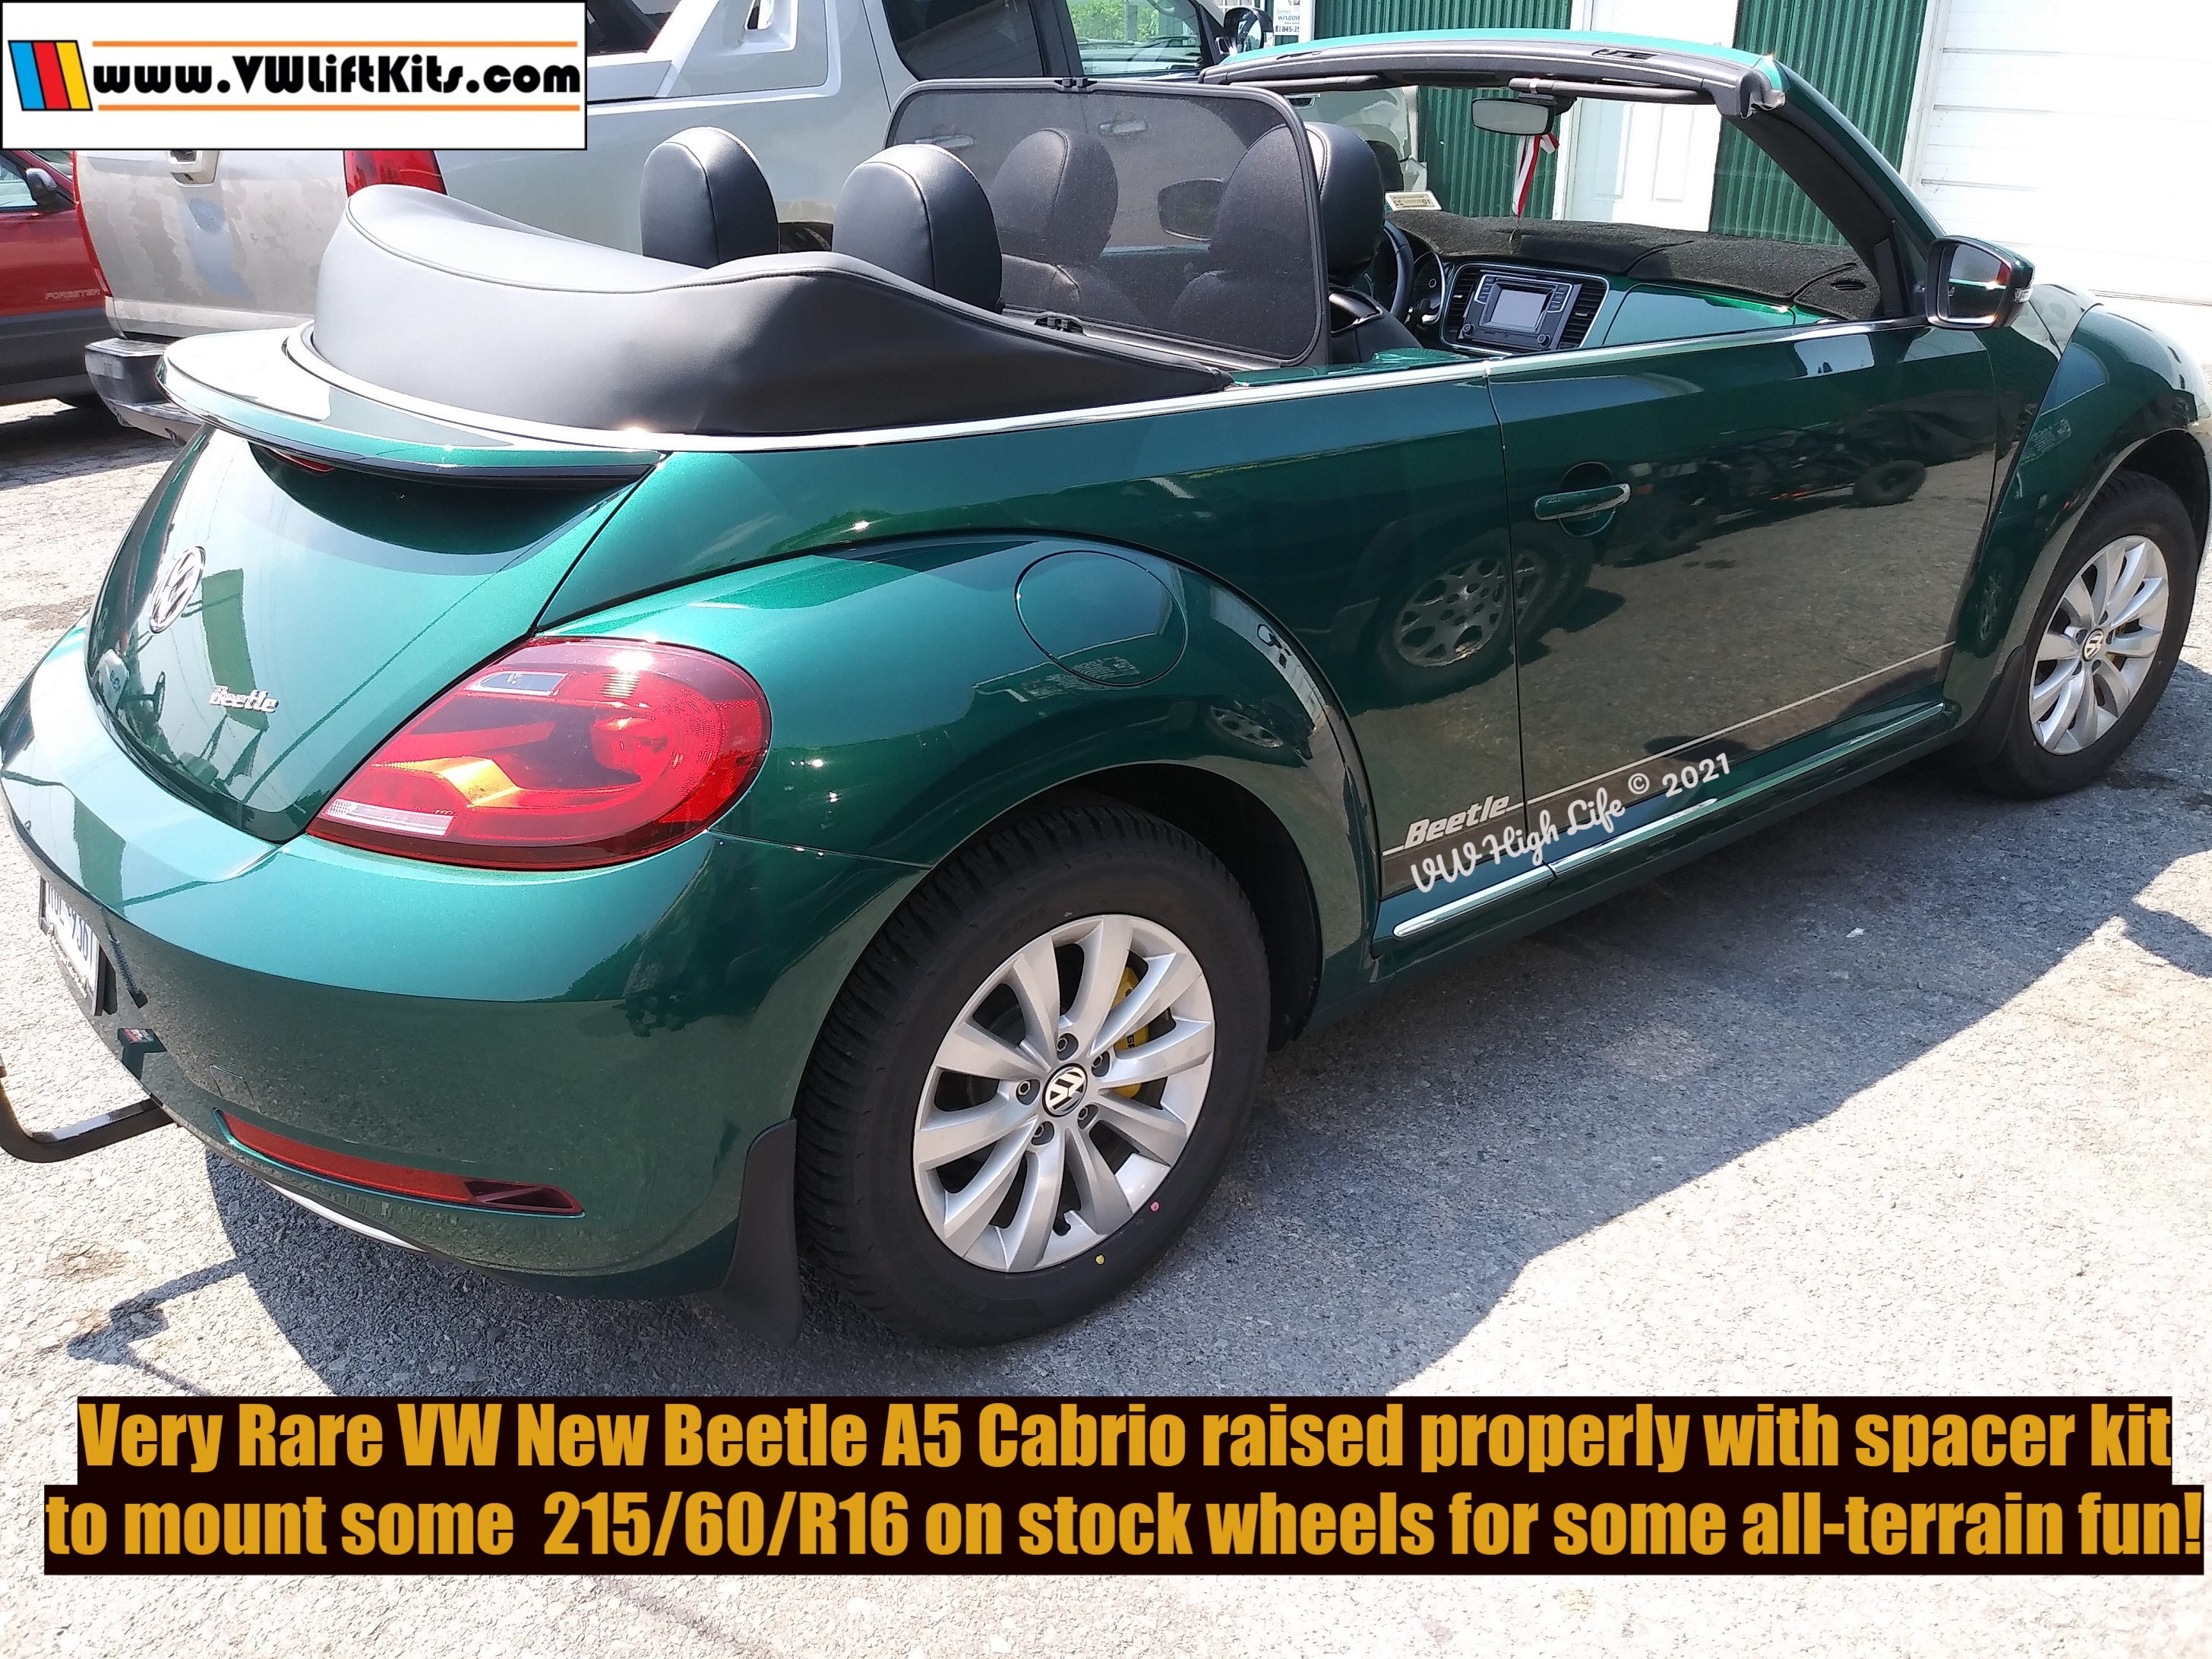 Volkswagen New Beetle A5 Convertible lifted properly for all terrain tires.